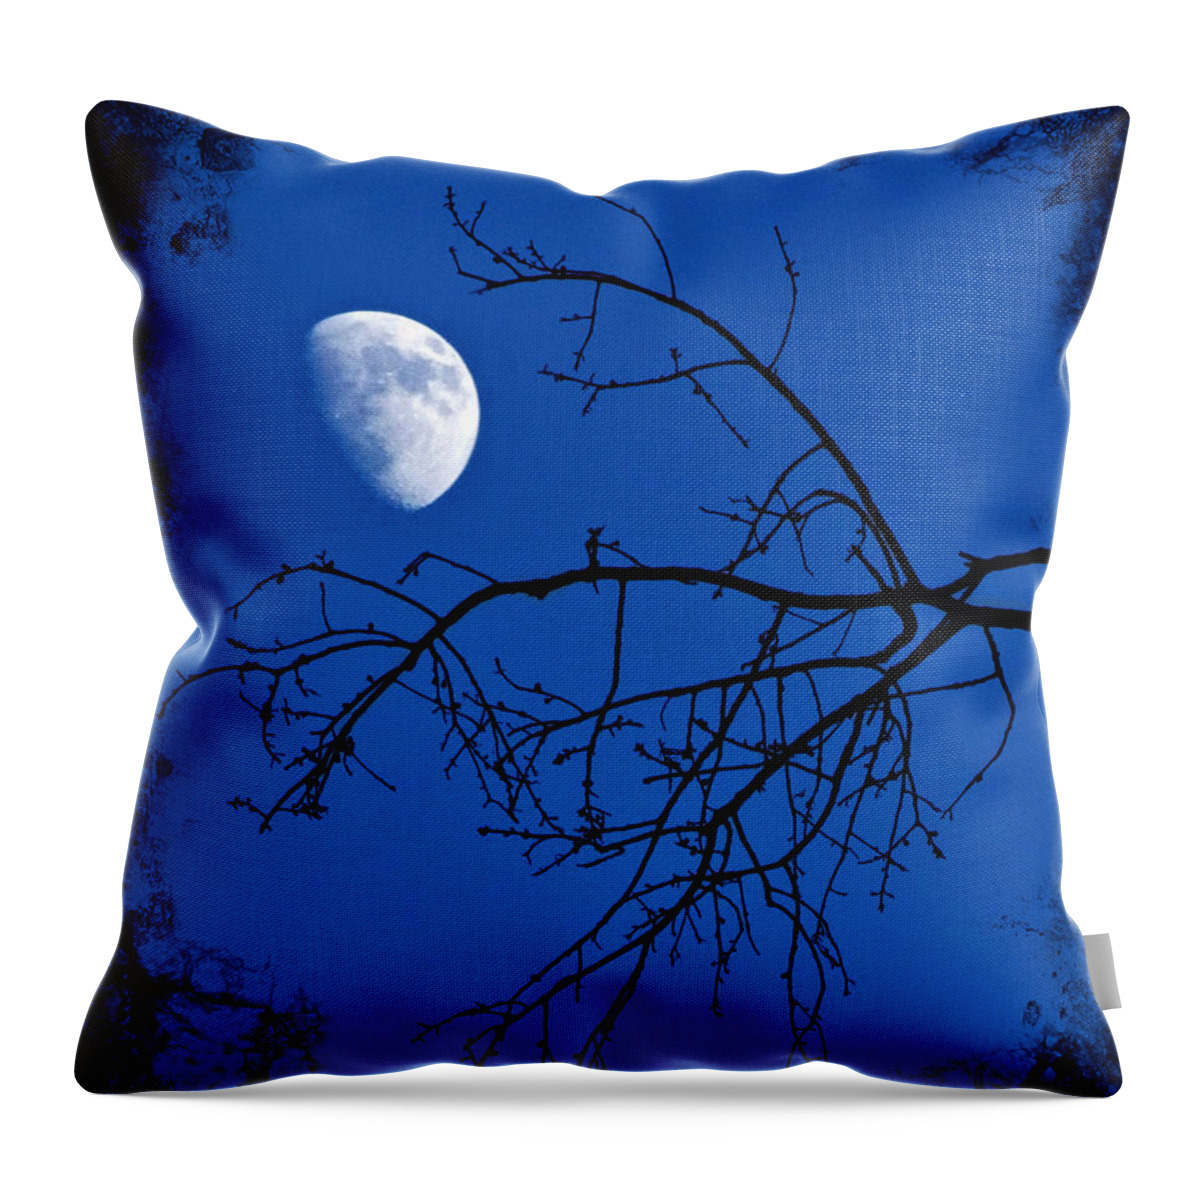 Haunted Throw Pillow featuring the photograph Haunted by Jemmy Archer